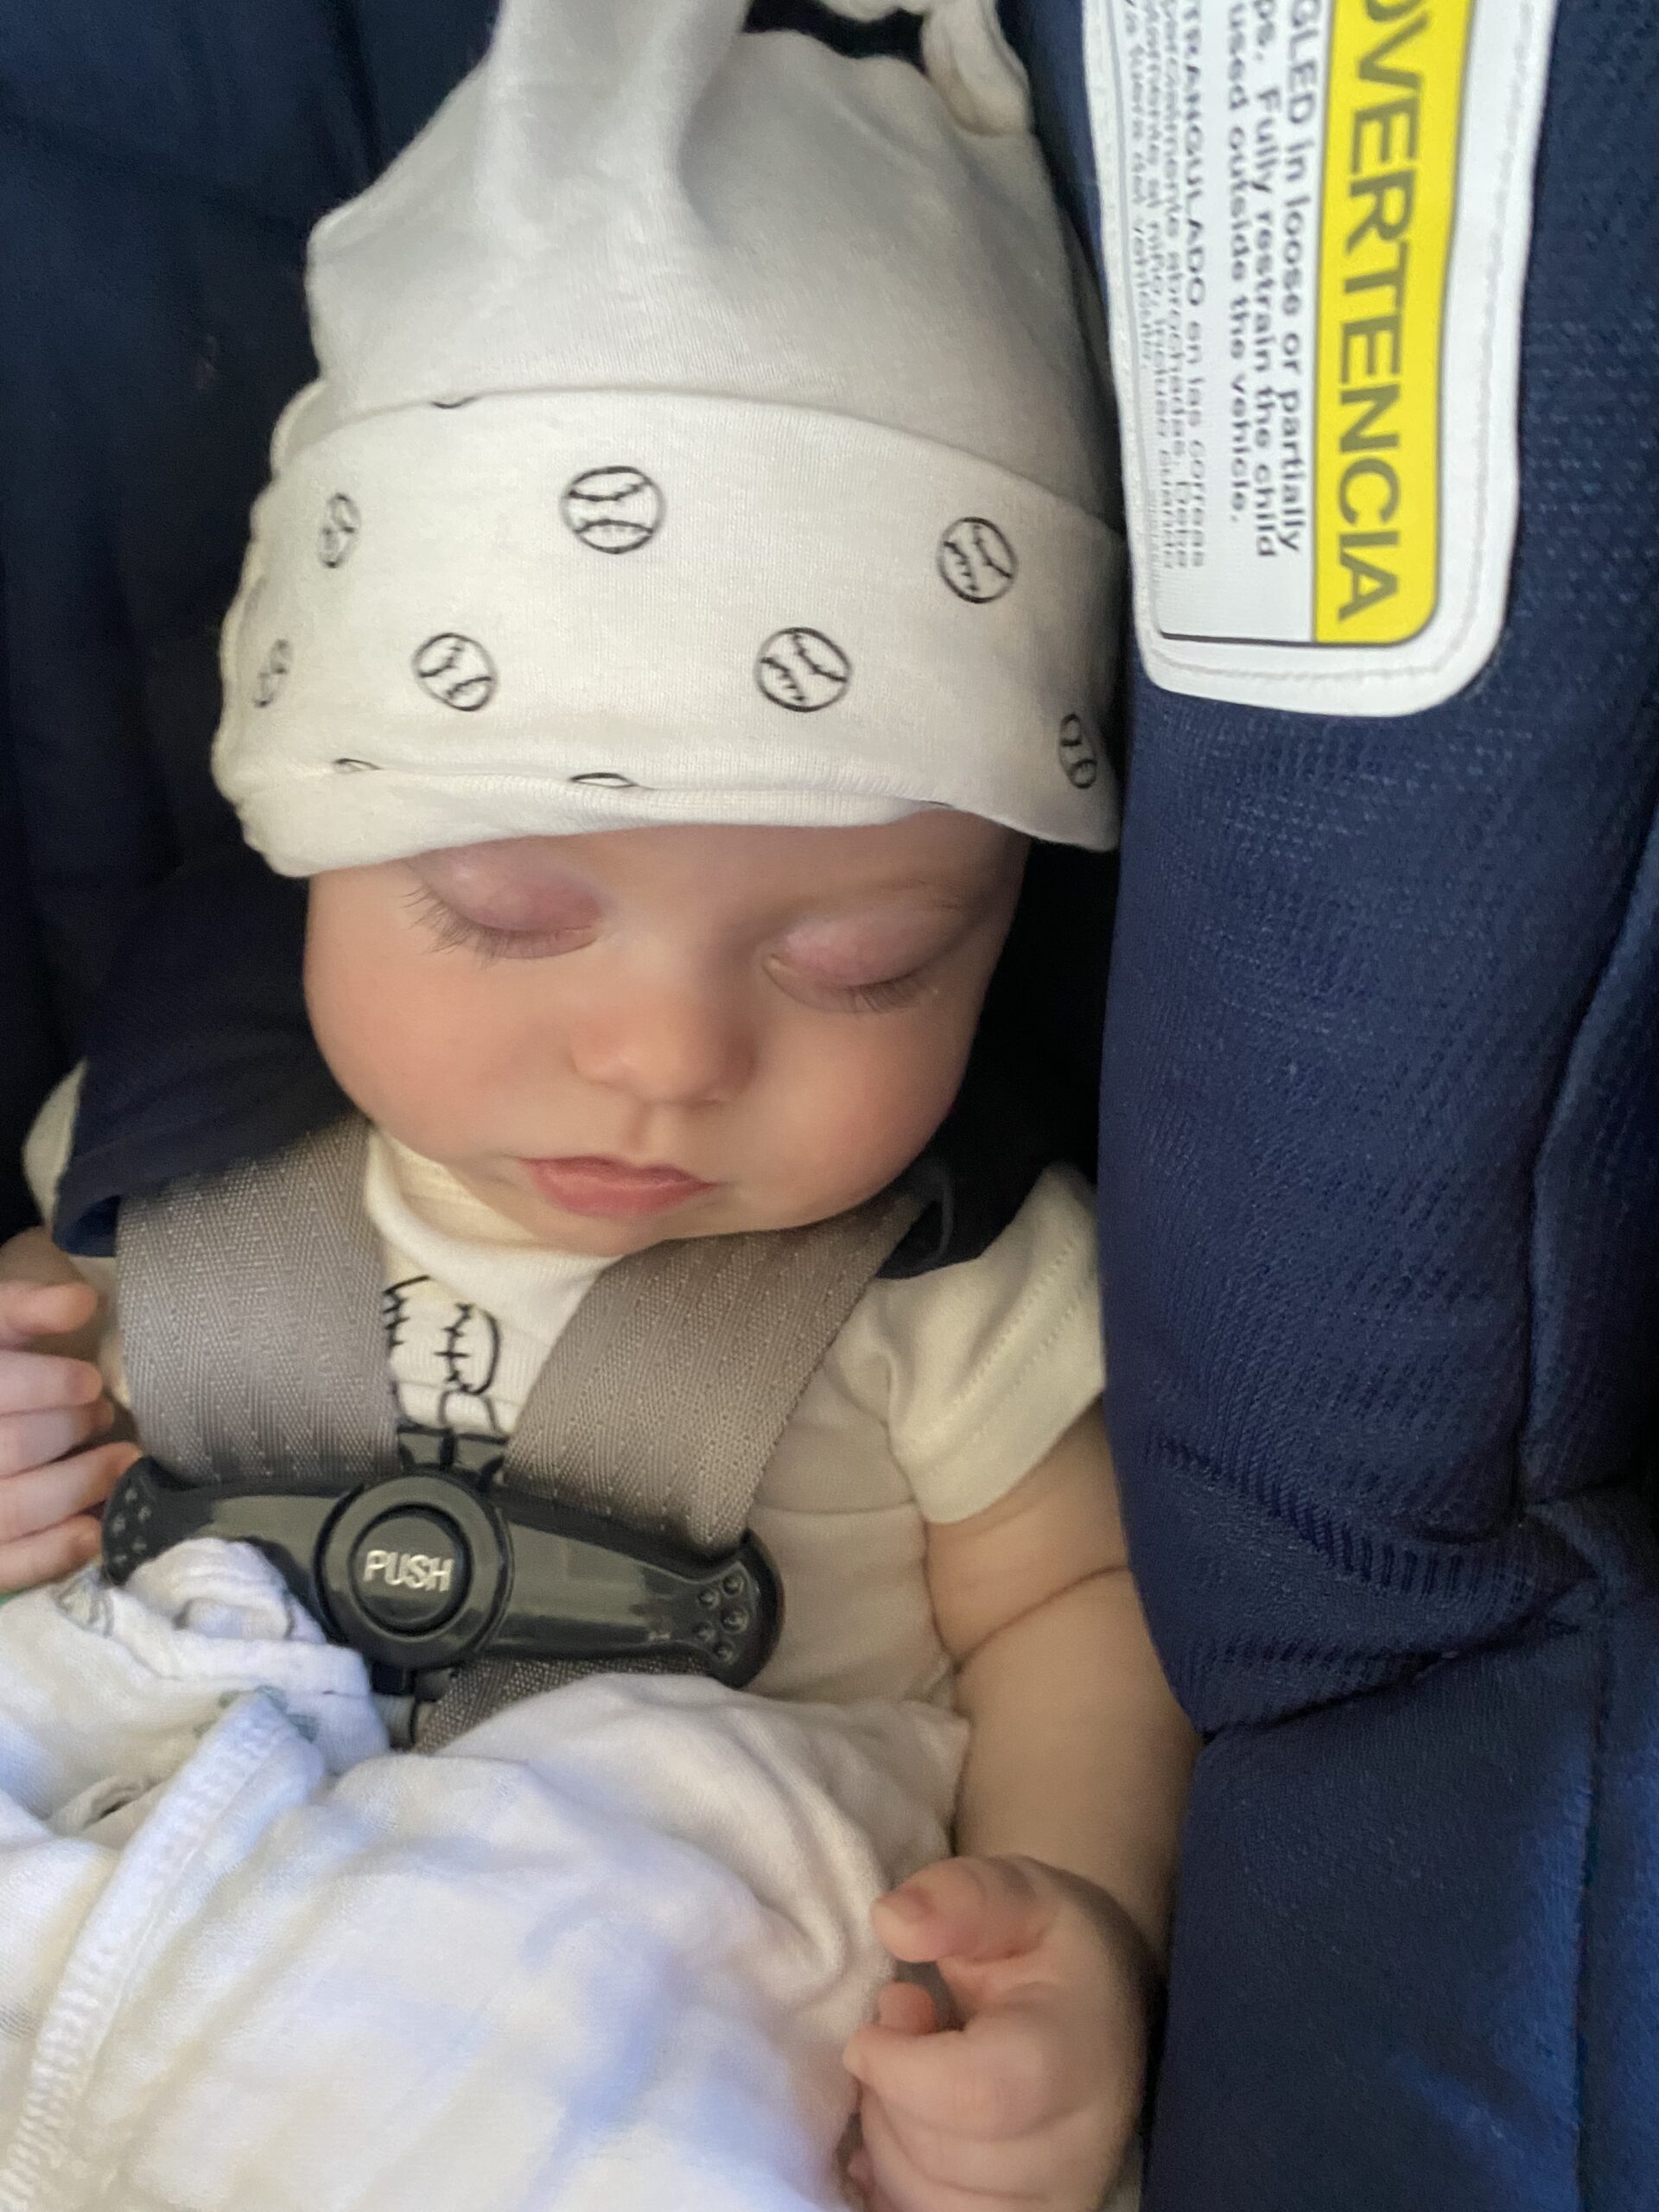 Road trip with an infant: naps